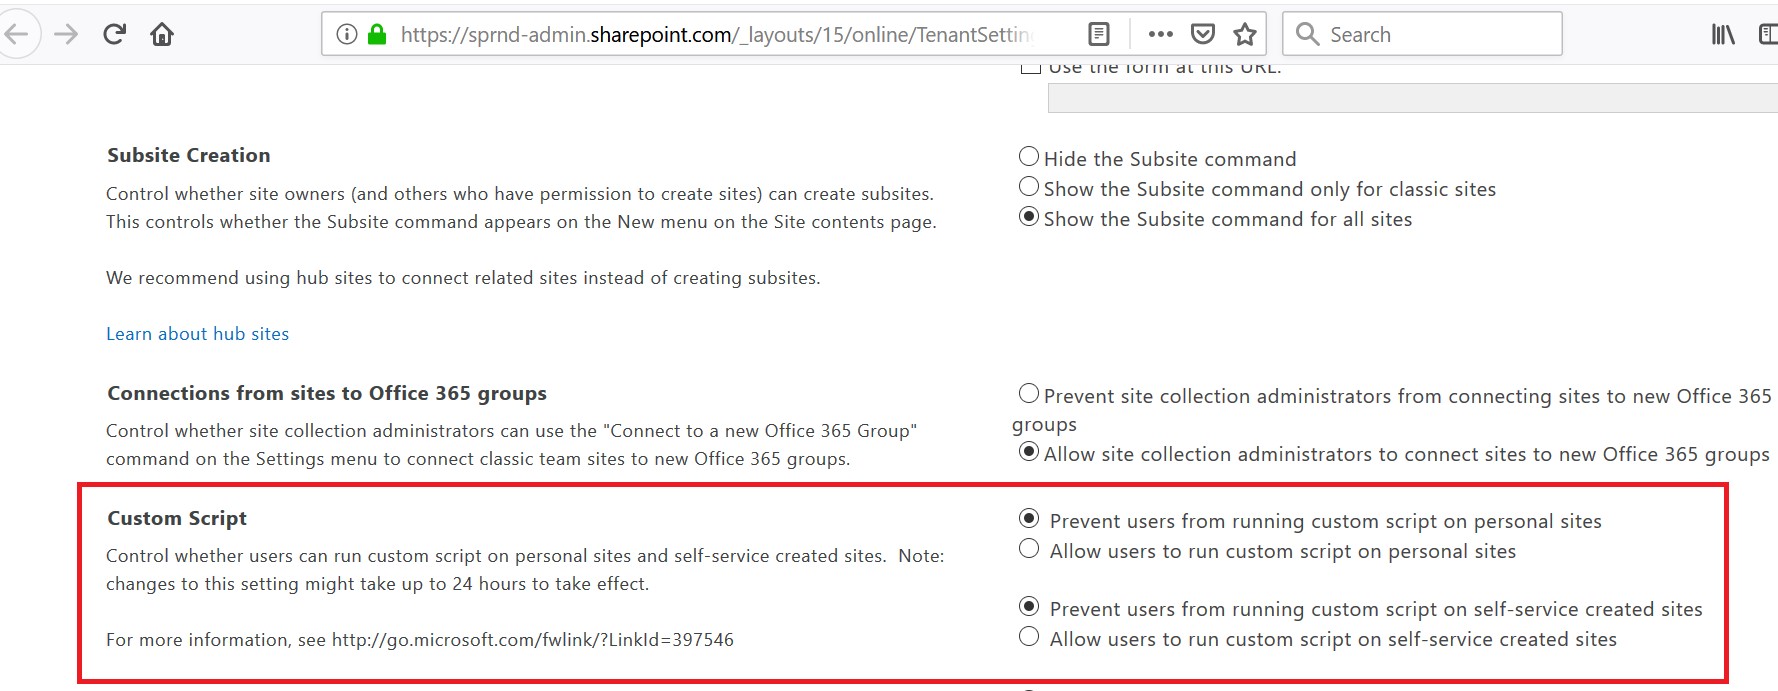 Prevent users from running custom script on personal sites in SharePoint Online